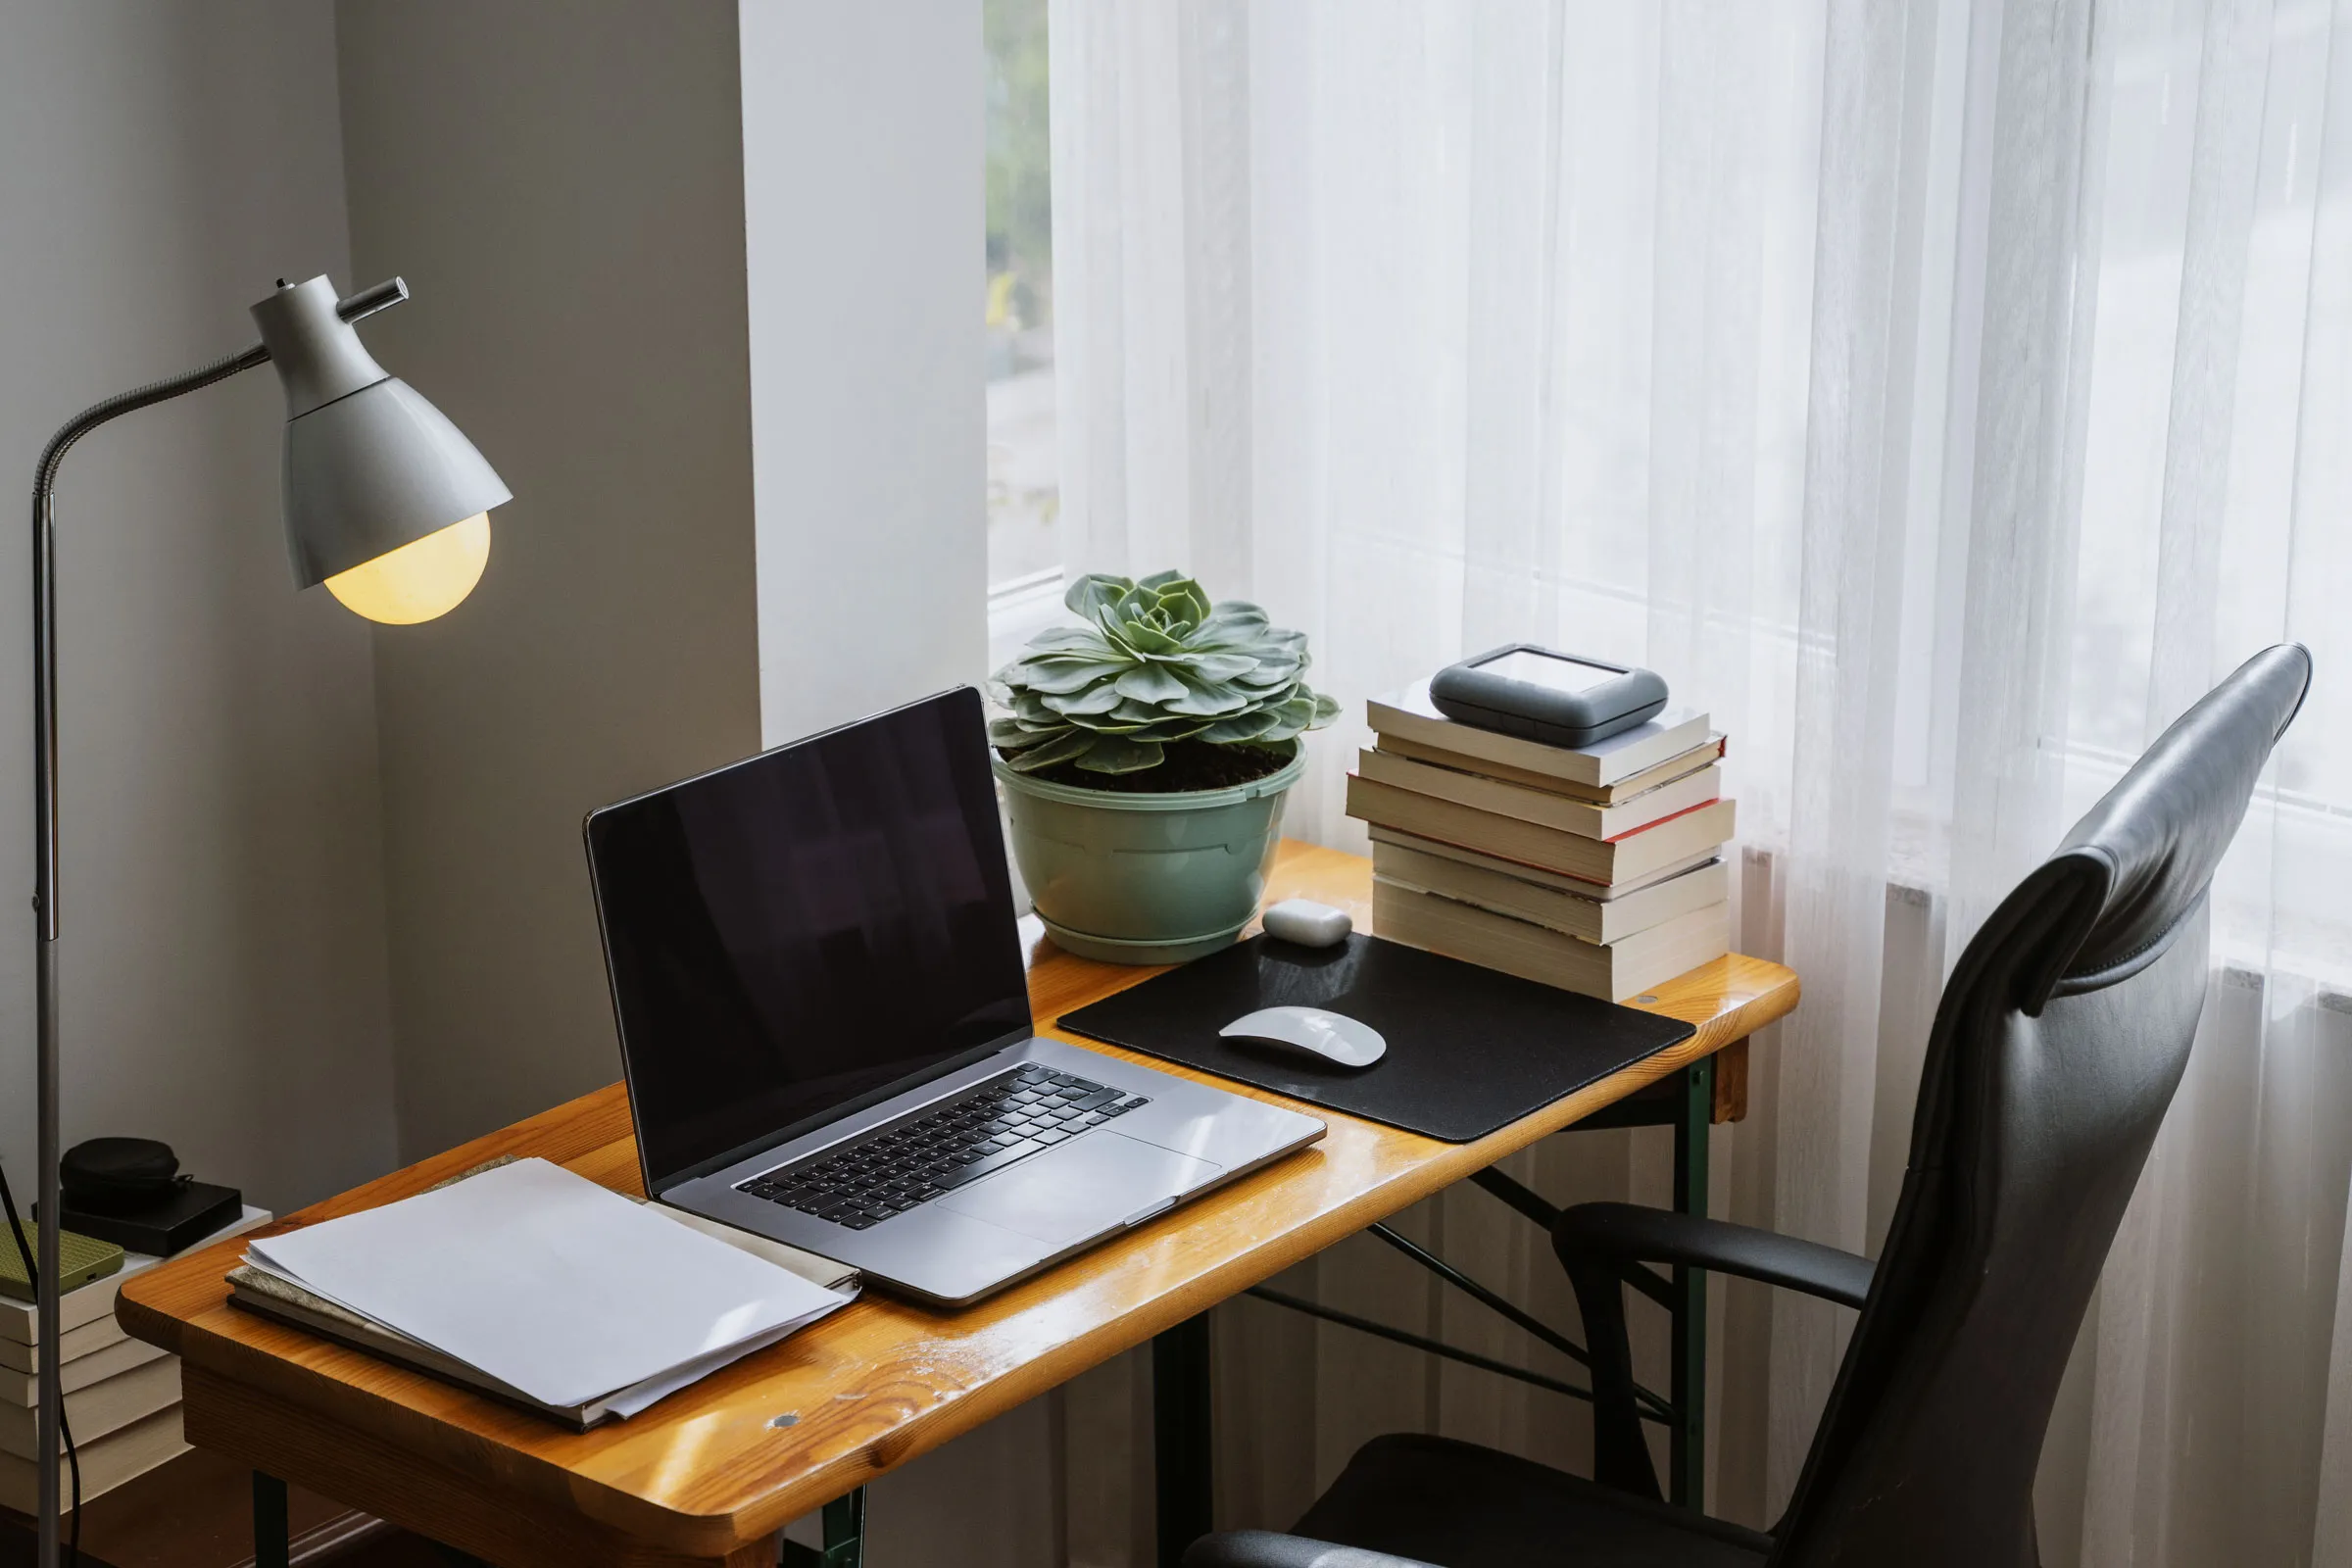 Setting Up Your Home Office: What Gear Do You Really Need?